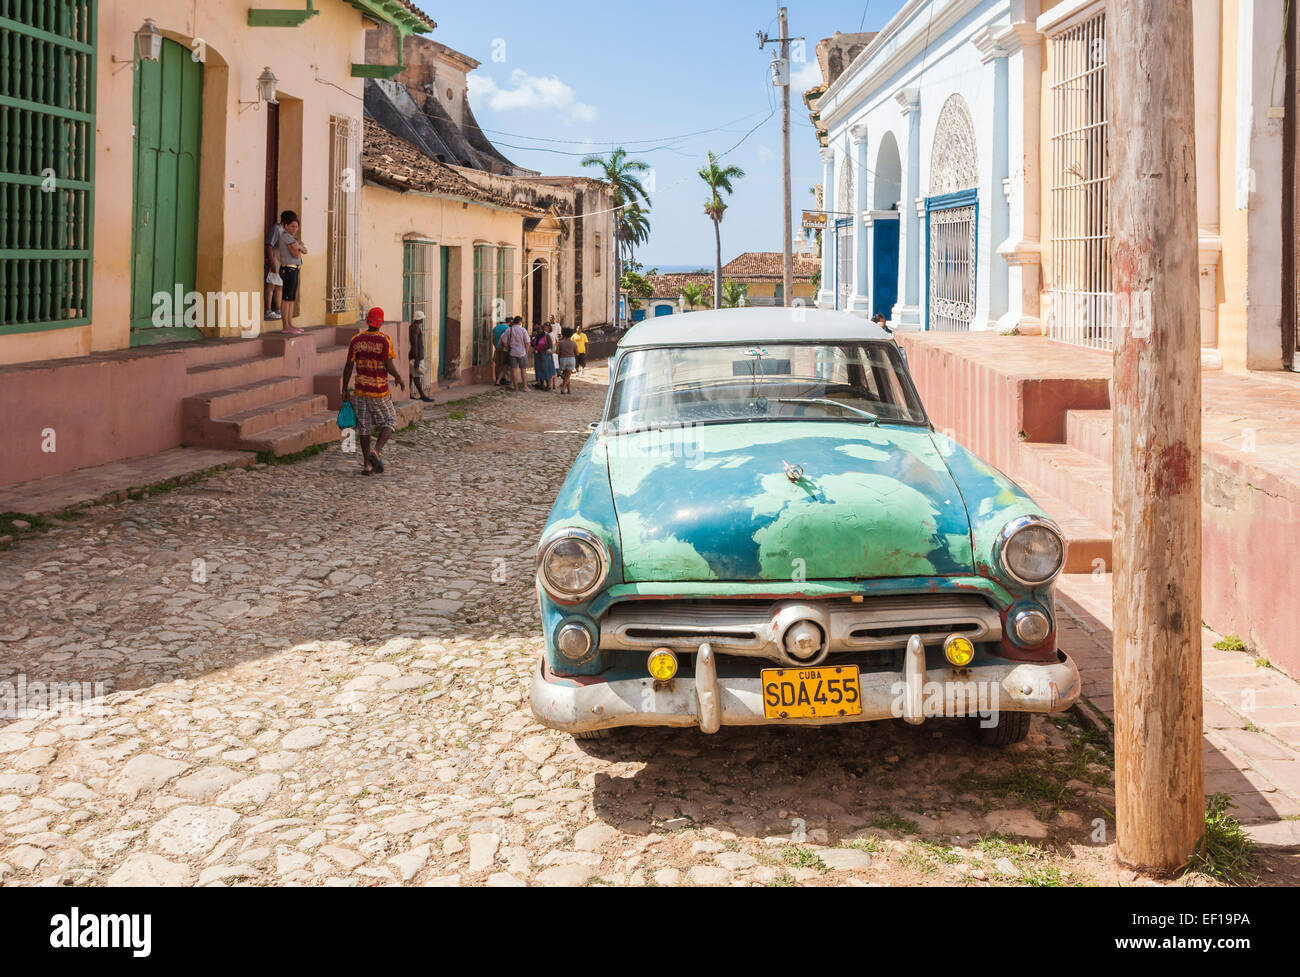 View of typical battered, old, rusty green vintage American car parked in a cobbled street in downtown Trinidad, Cuba on a sunny day with blue sky Stock Photo